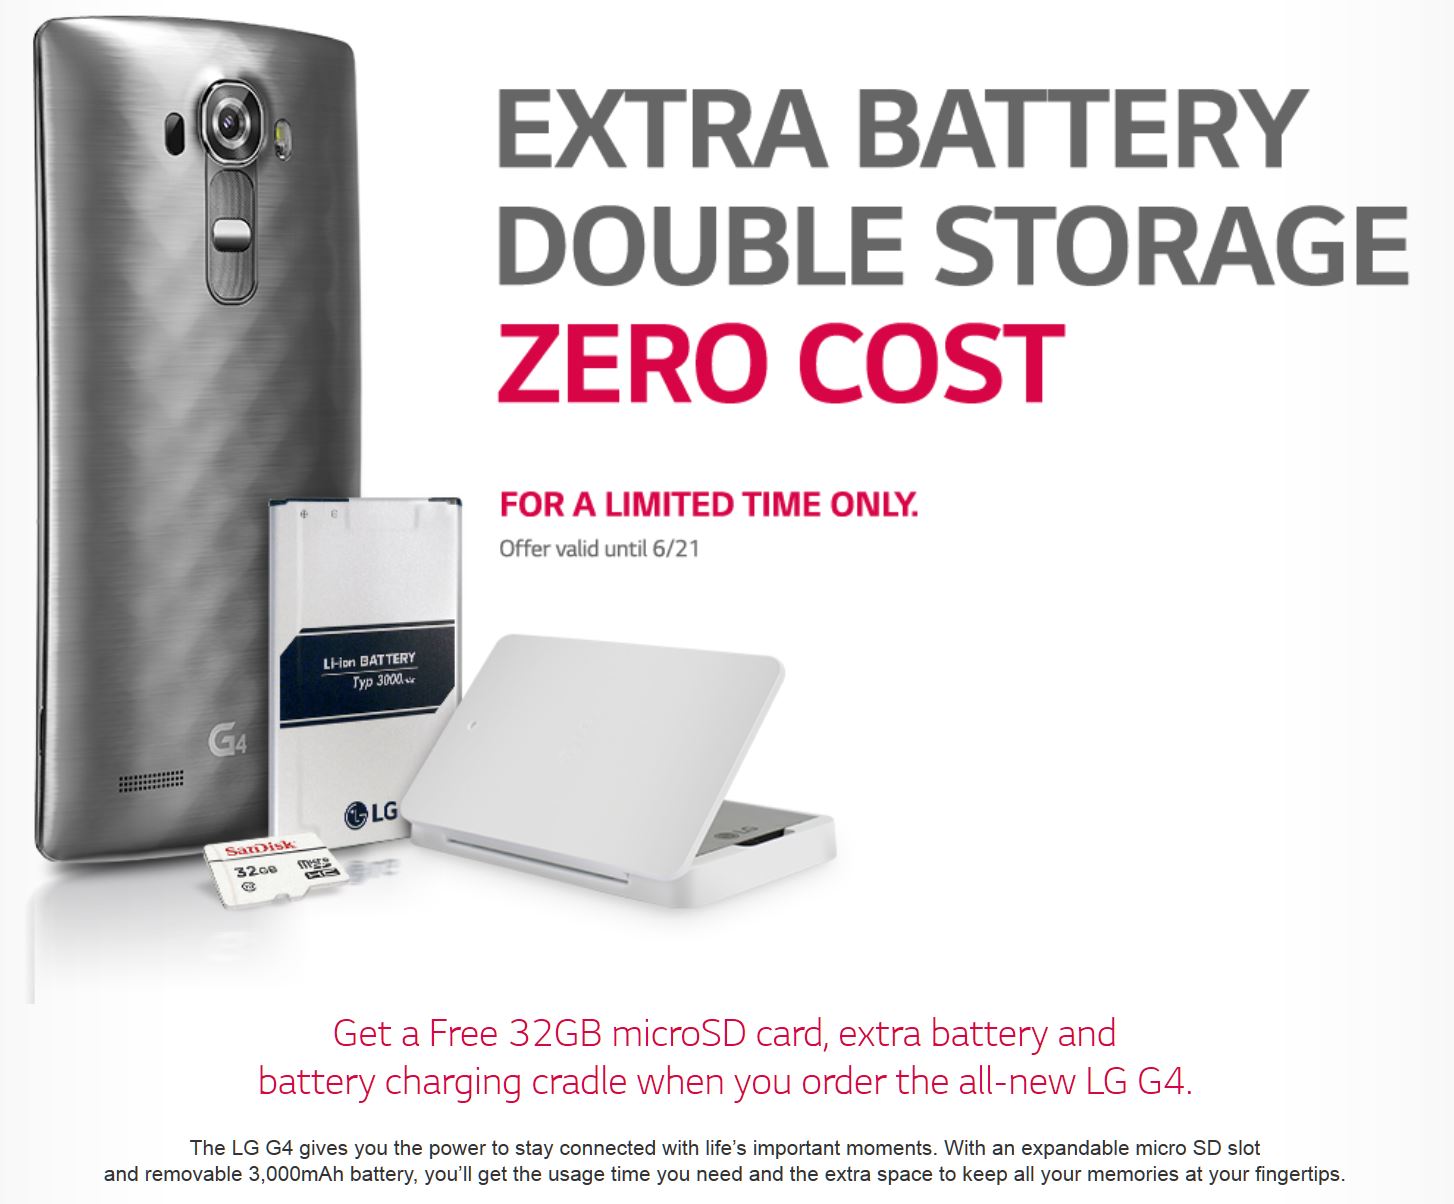 LG is giving an extra battery, charging cradle and 32GB microSD to early adopters of the G4 in USA